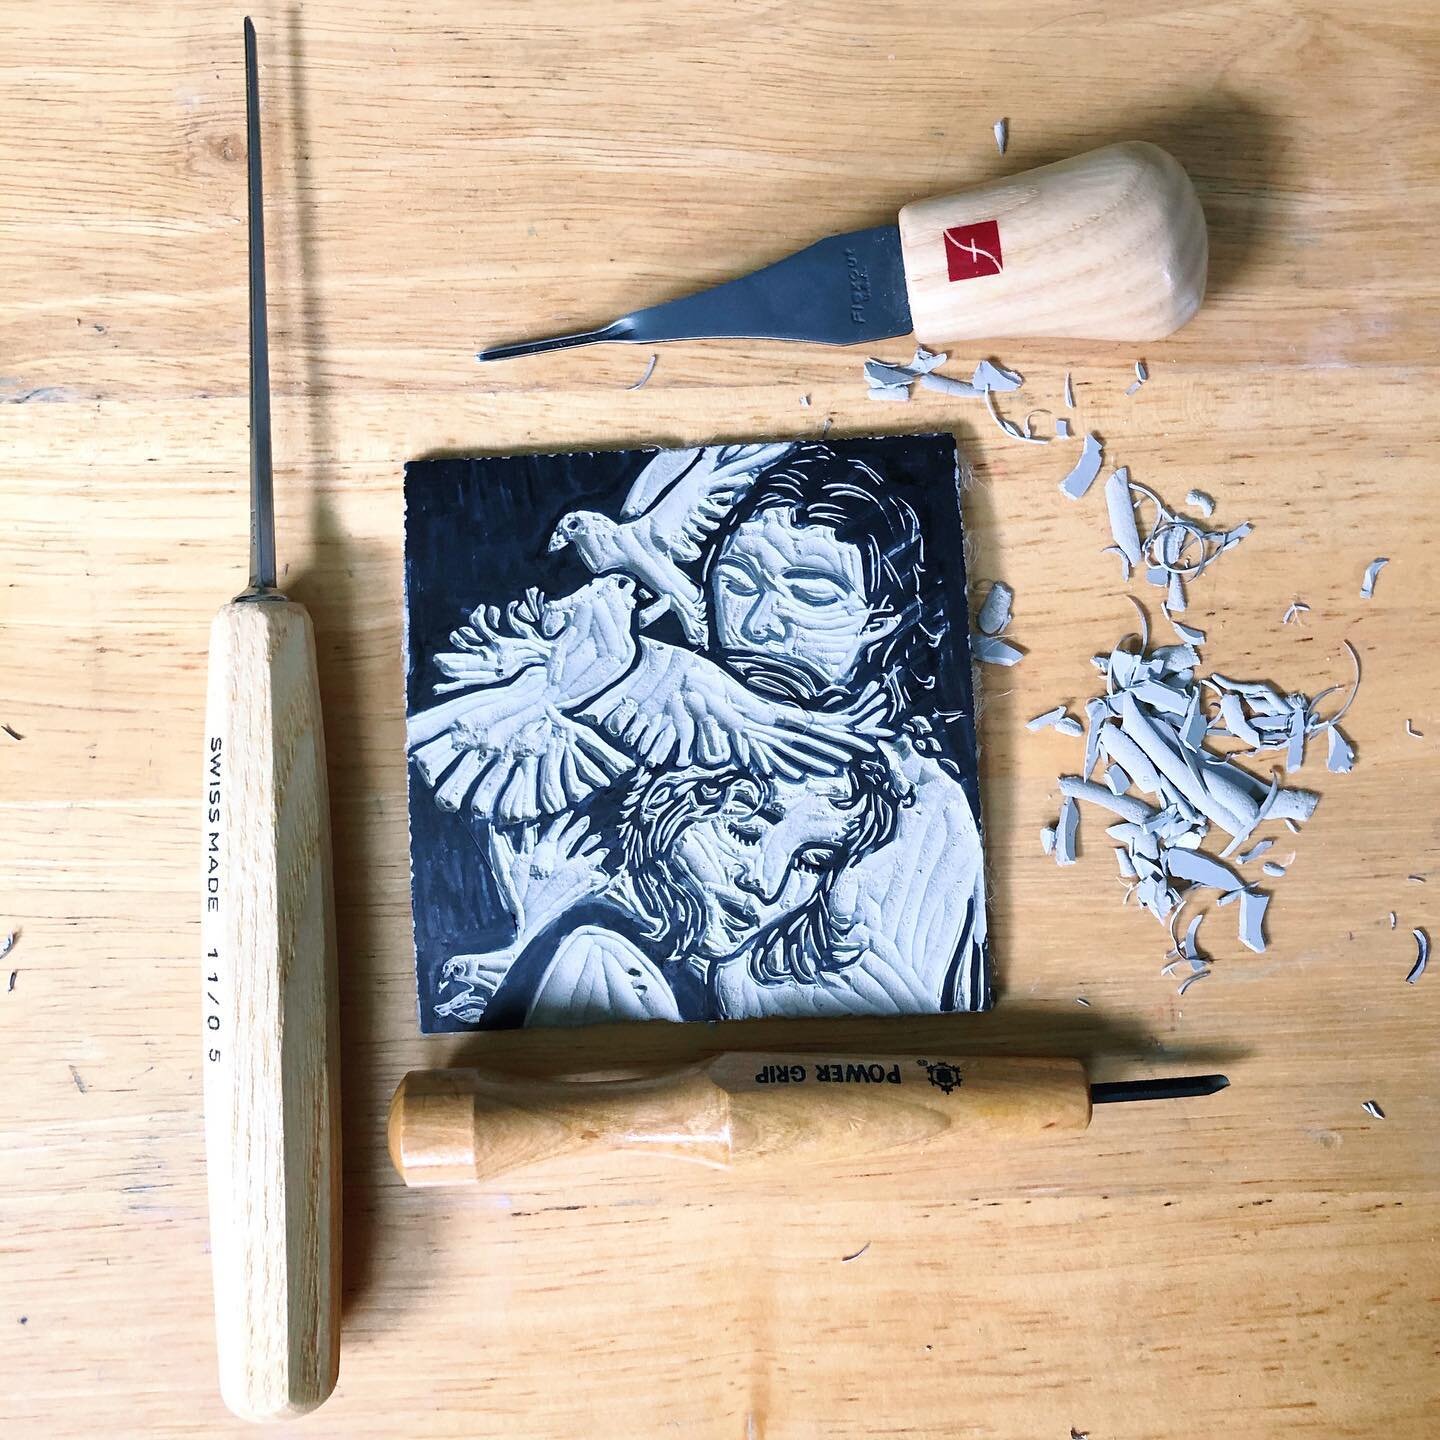 This month&rsquo;s wee print carving . Healing is hard. Go easy. Everyone is carrying something. ❤️

Every month I make a mini print for my Ink and Soul Patrons on Patreon. Its a great way to make art affordable for everyone. It&rsquo;s one of my fav